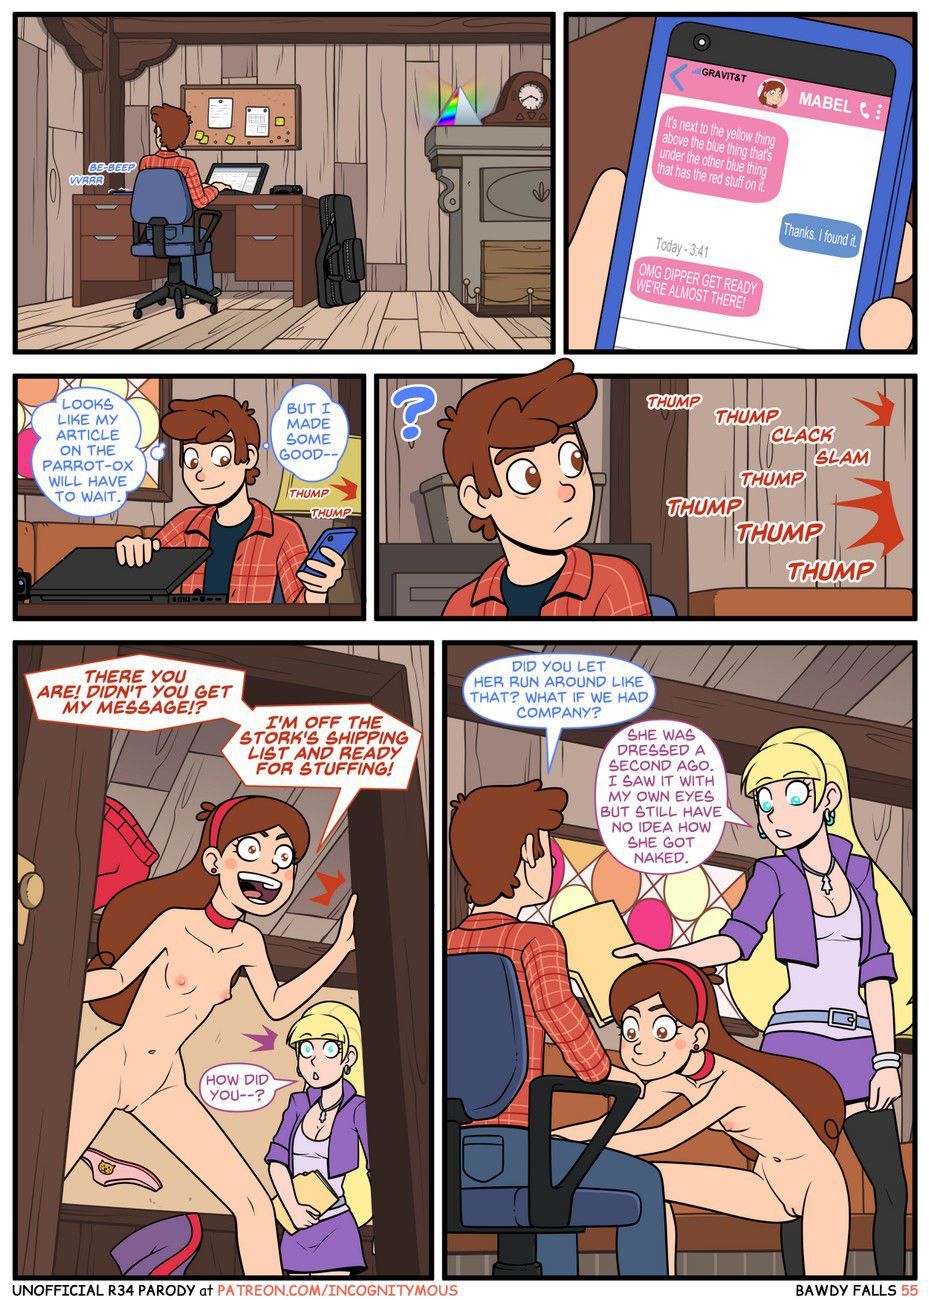 [Incognitymous] Bawdy Falls (Gravity Falls) ongoing 56